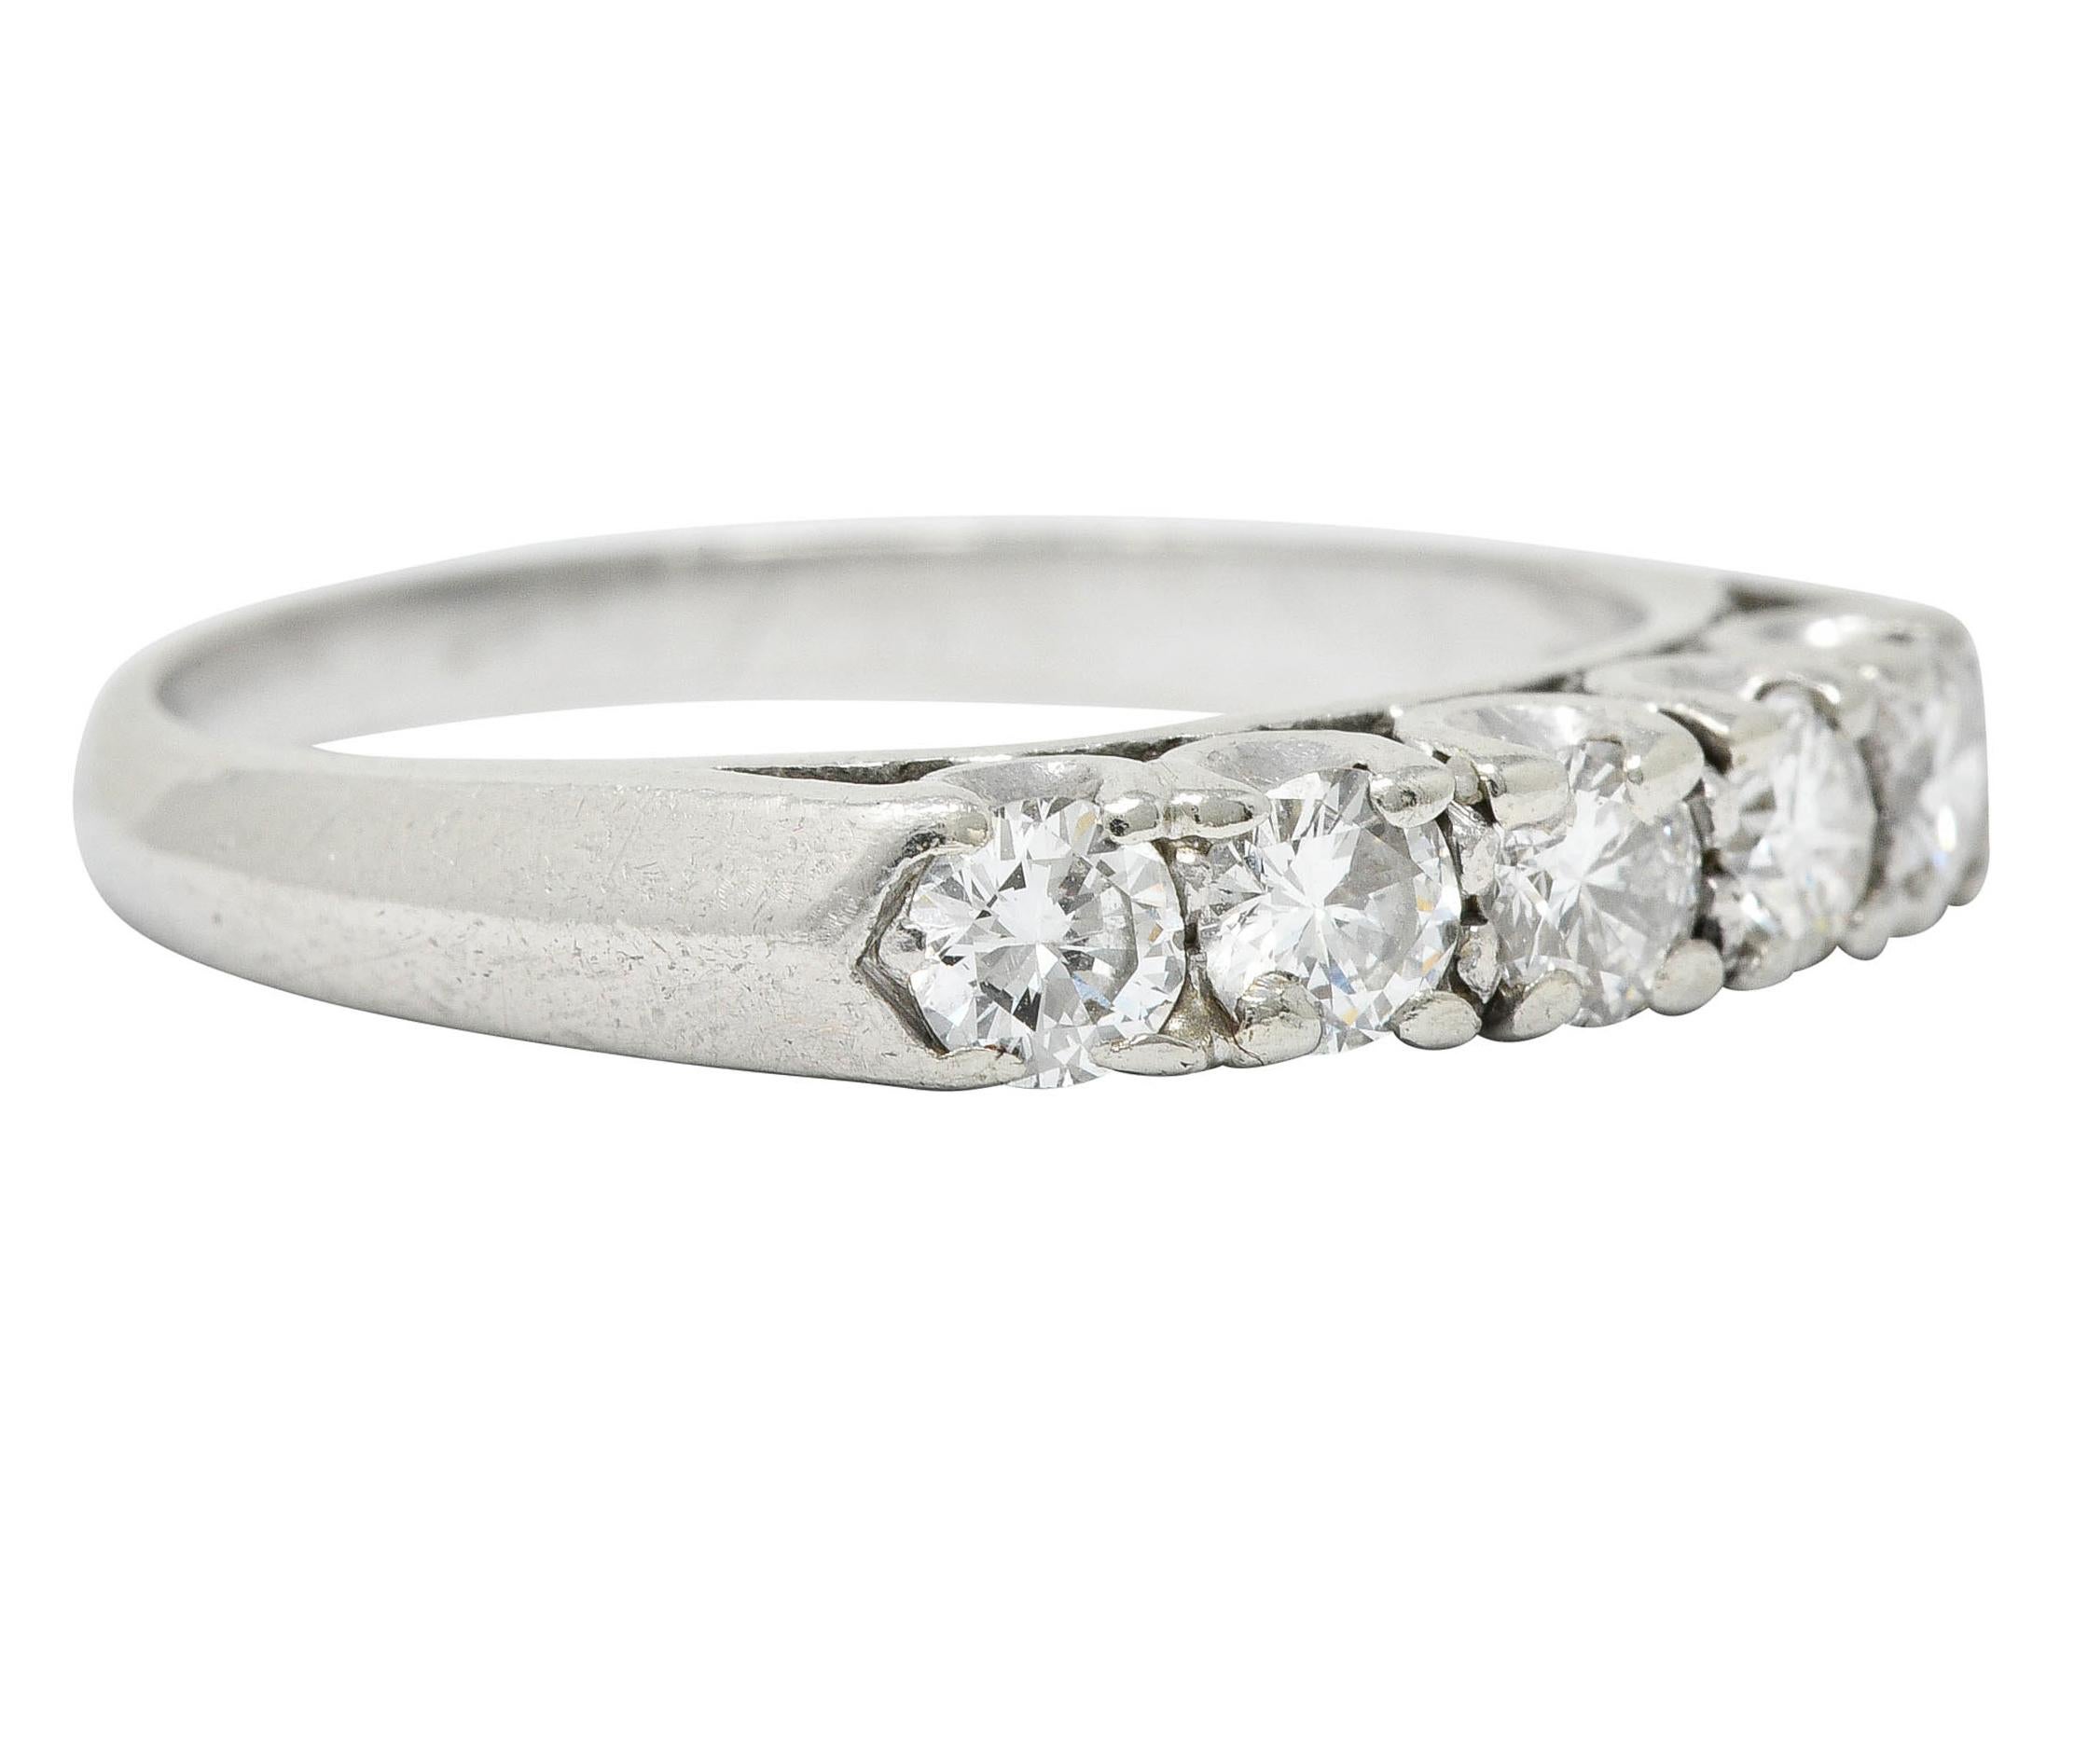 Set to front by five round brilliant cut diamonds

Weighing in total approximately 0.75 carat; G/H color with VS clarity

With a fishtail motif profile and slight cathedral shoulders

Stamped for platinum

Circa: 1950s

Ring Size: 7 1/2 &